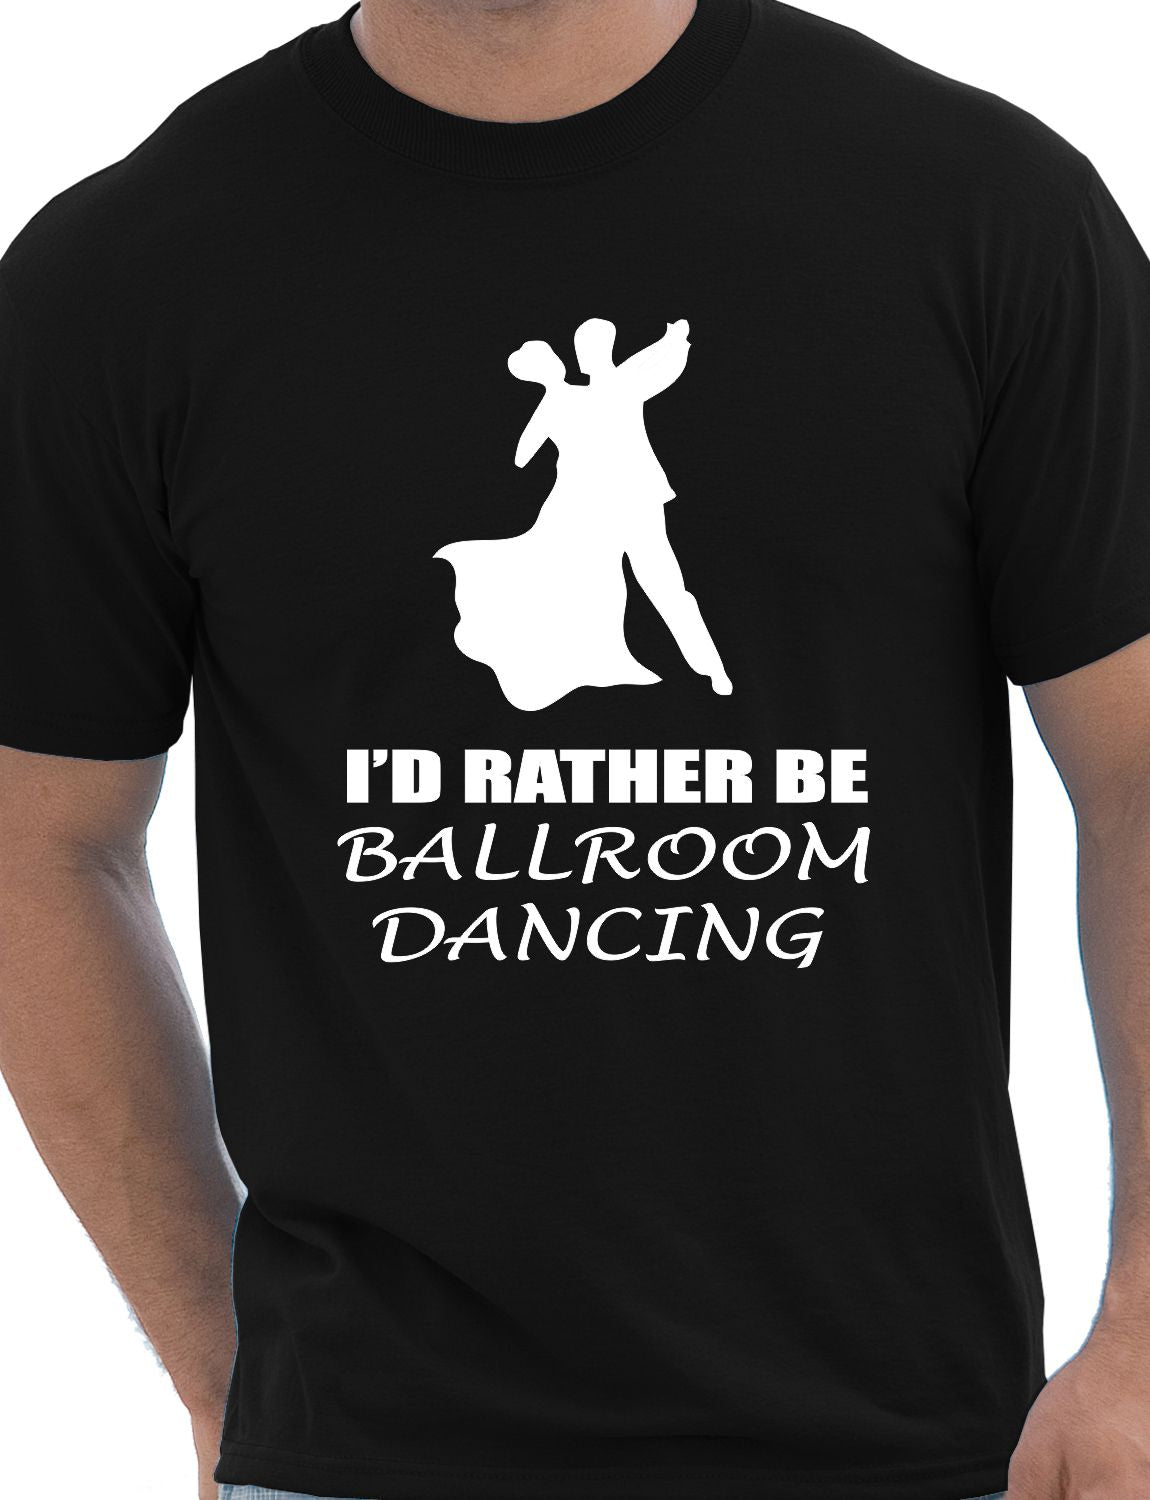 I'd Rather Be Ballroom Dancing Funny Gift Mens T-Shirt Size S-XXL